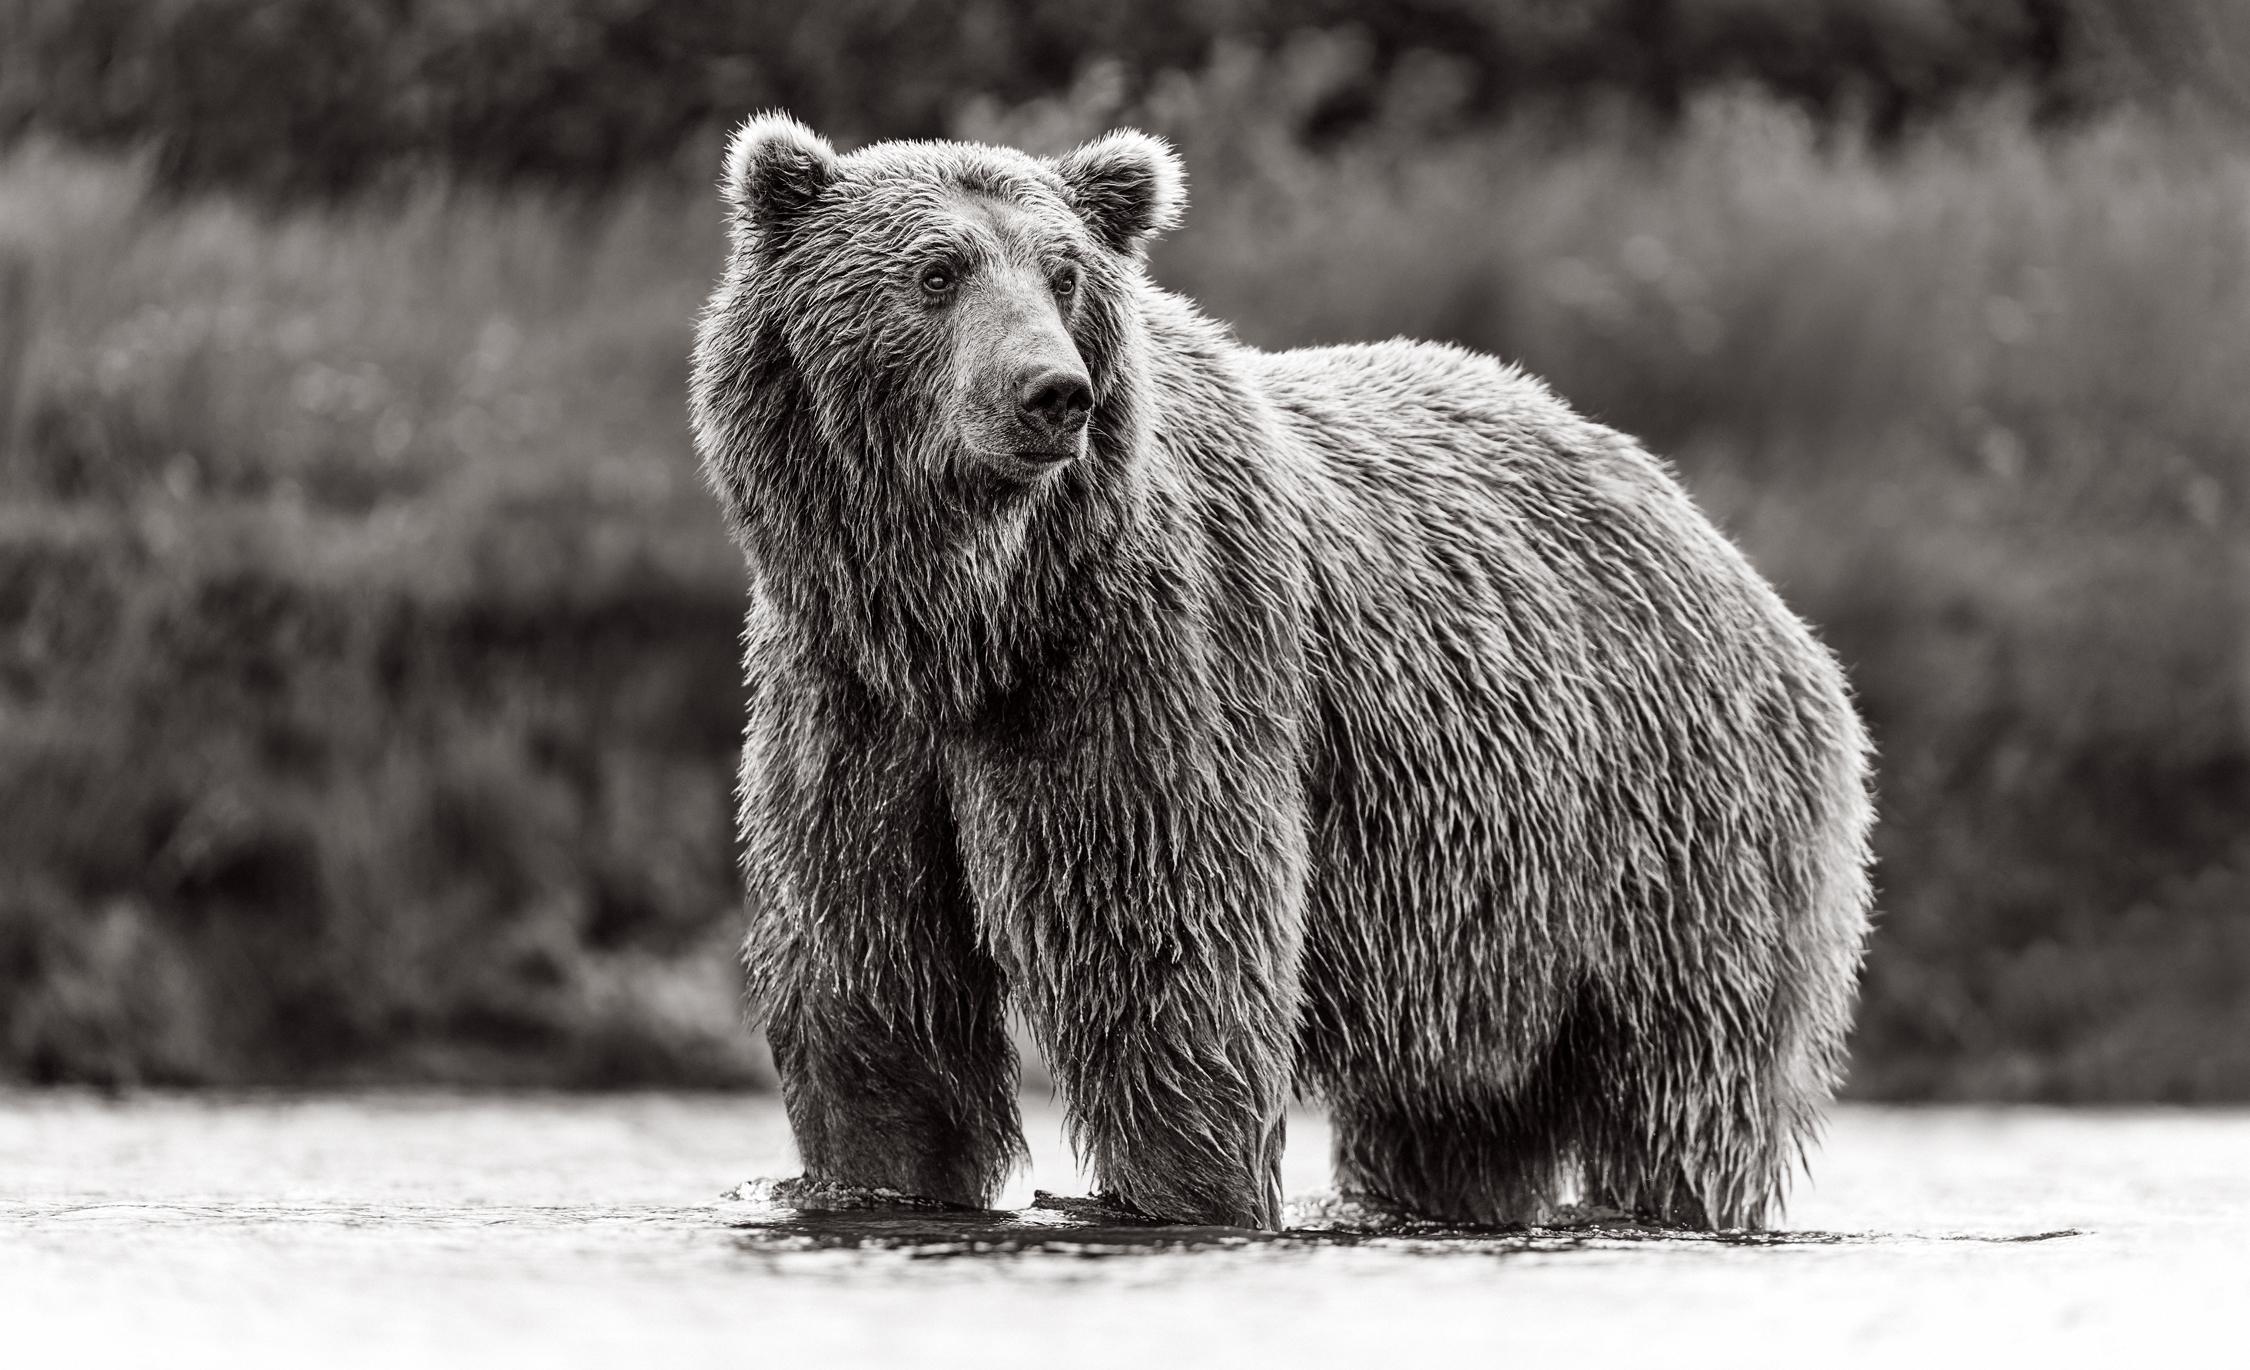 Black & white portrait of a brown bear in the creek against dense foliage - Photograph by Drew Doggett